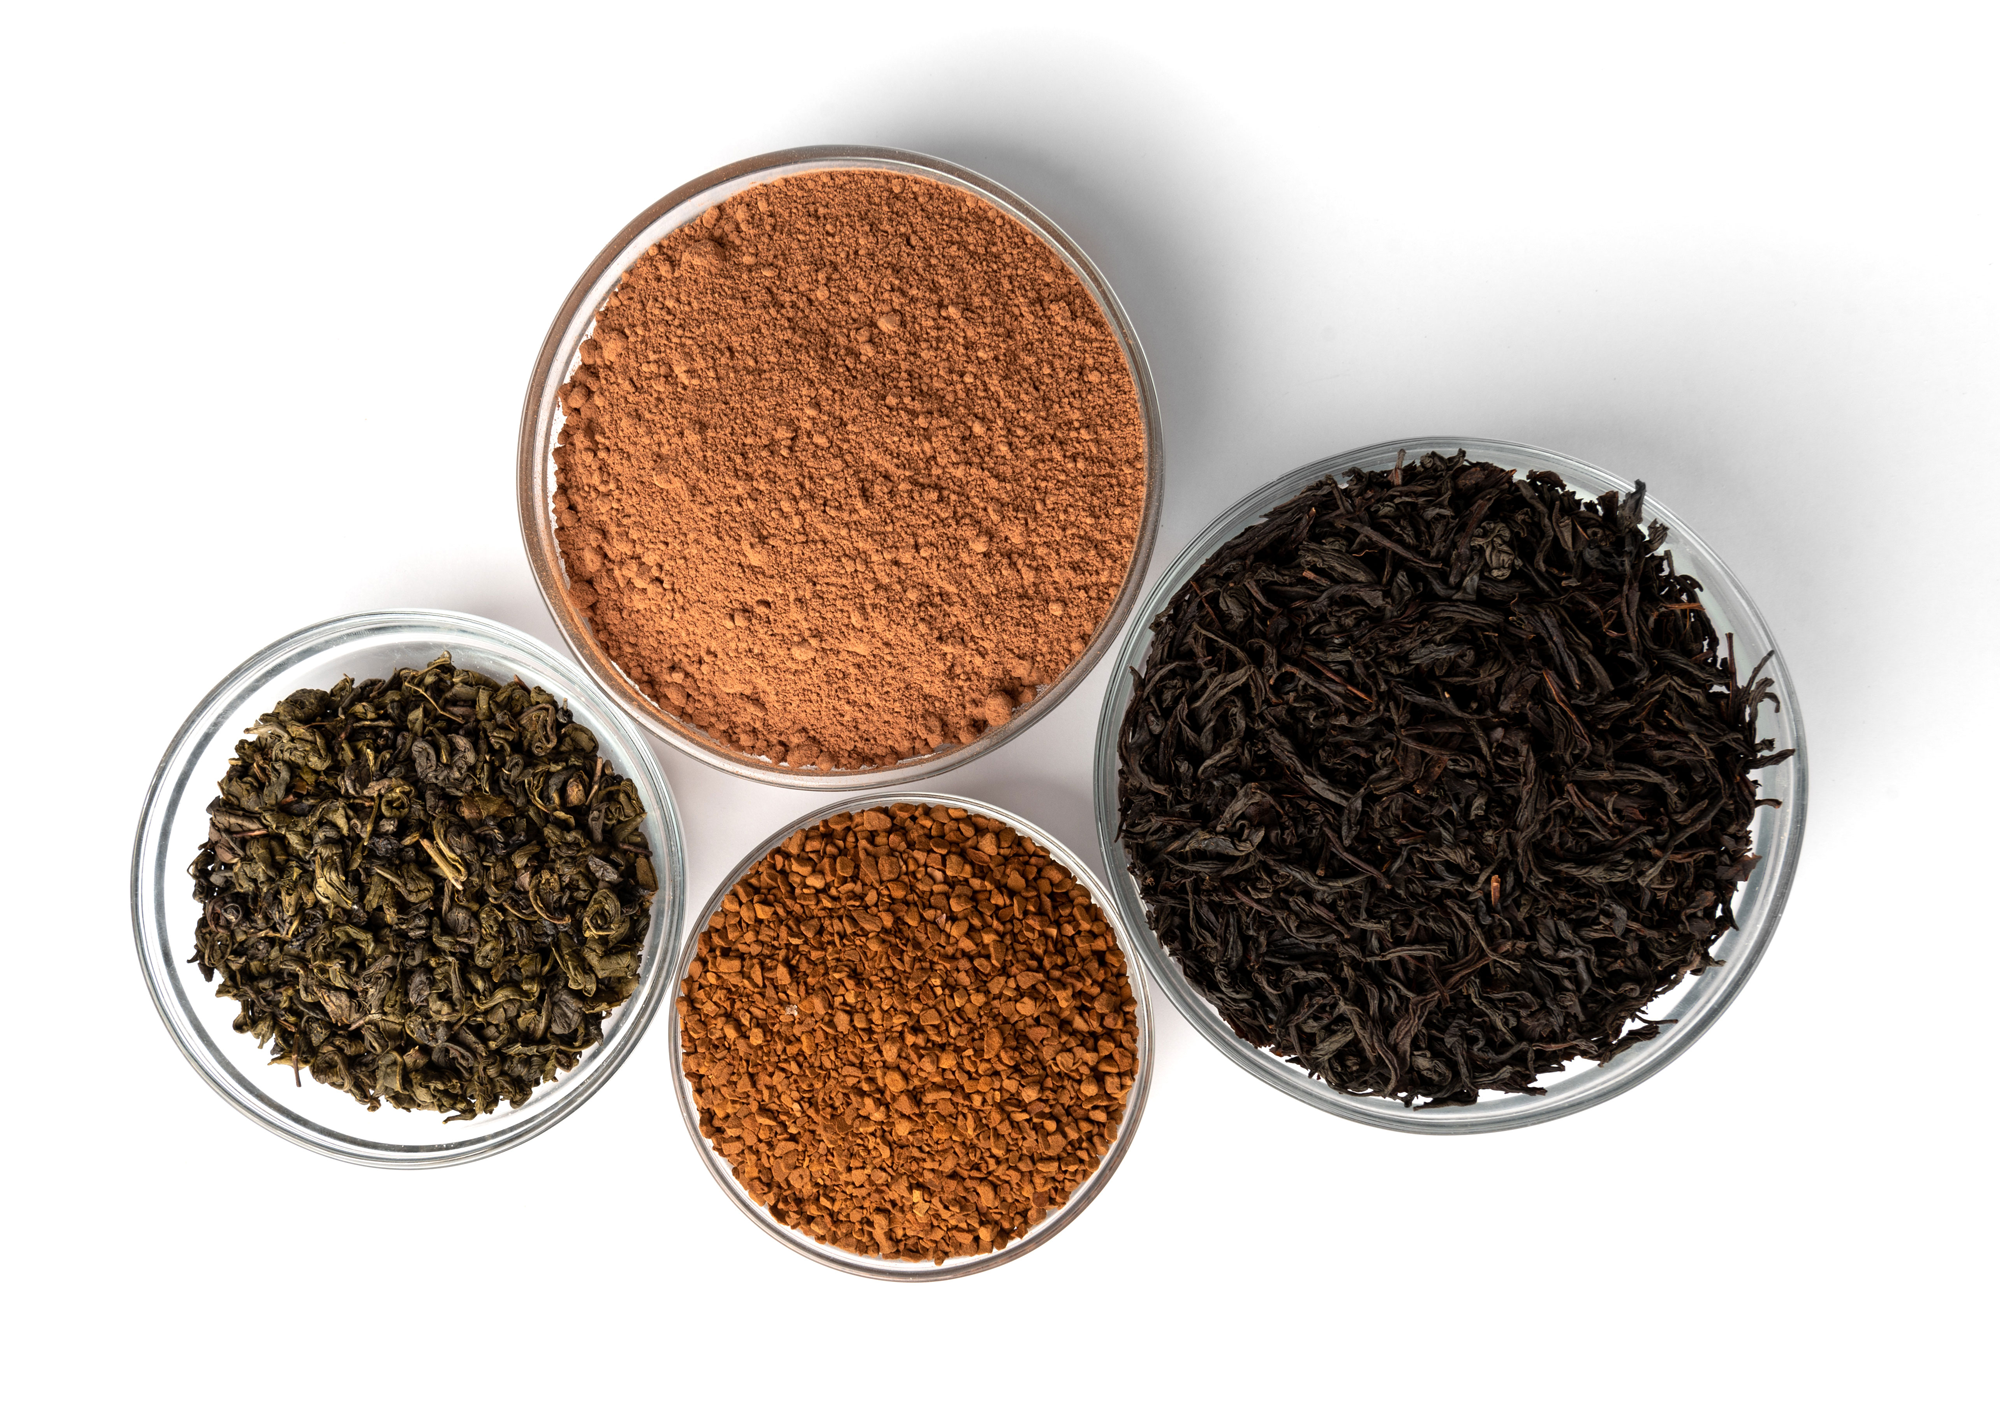 Coffee and tea ingredients for manufacturing